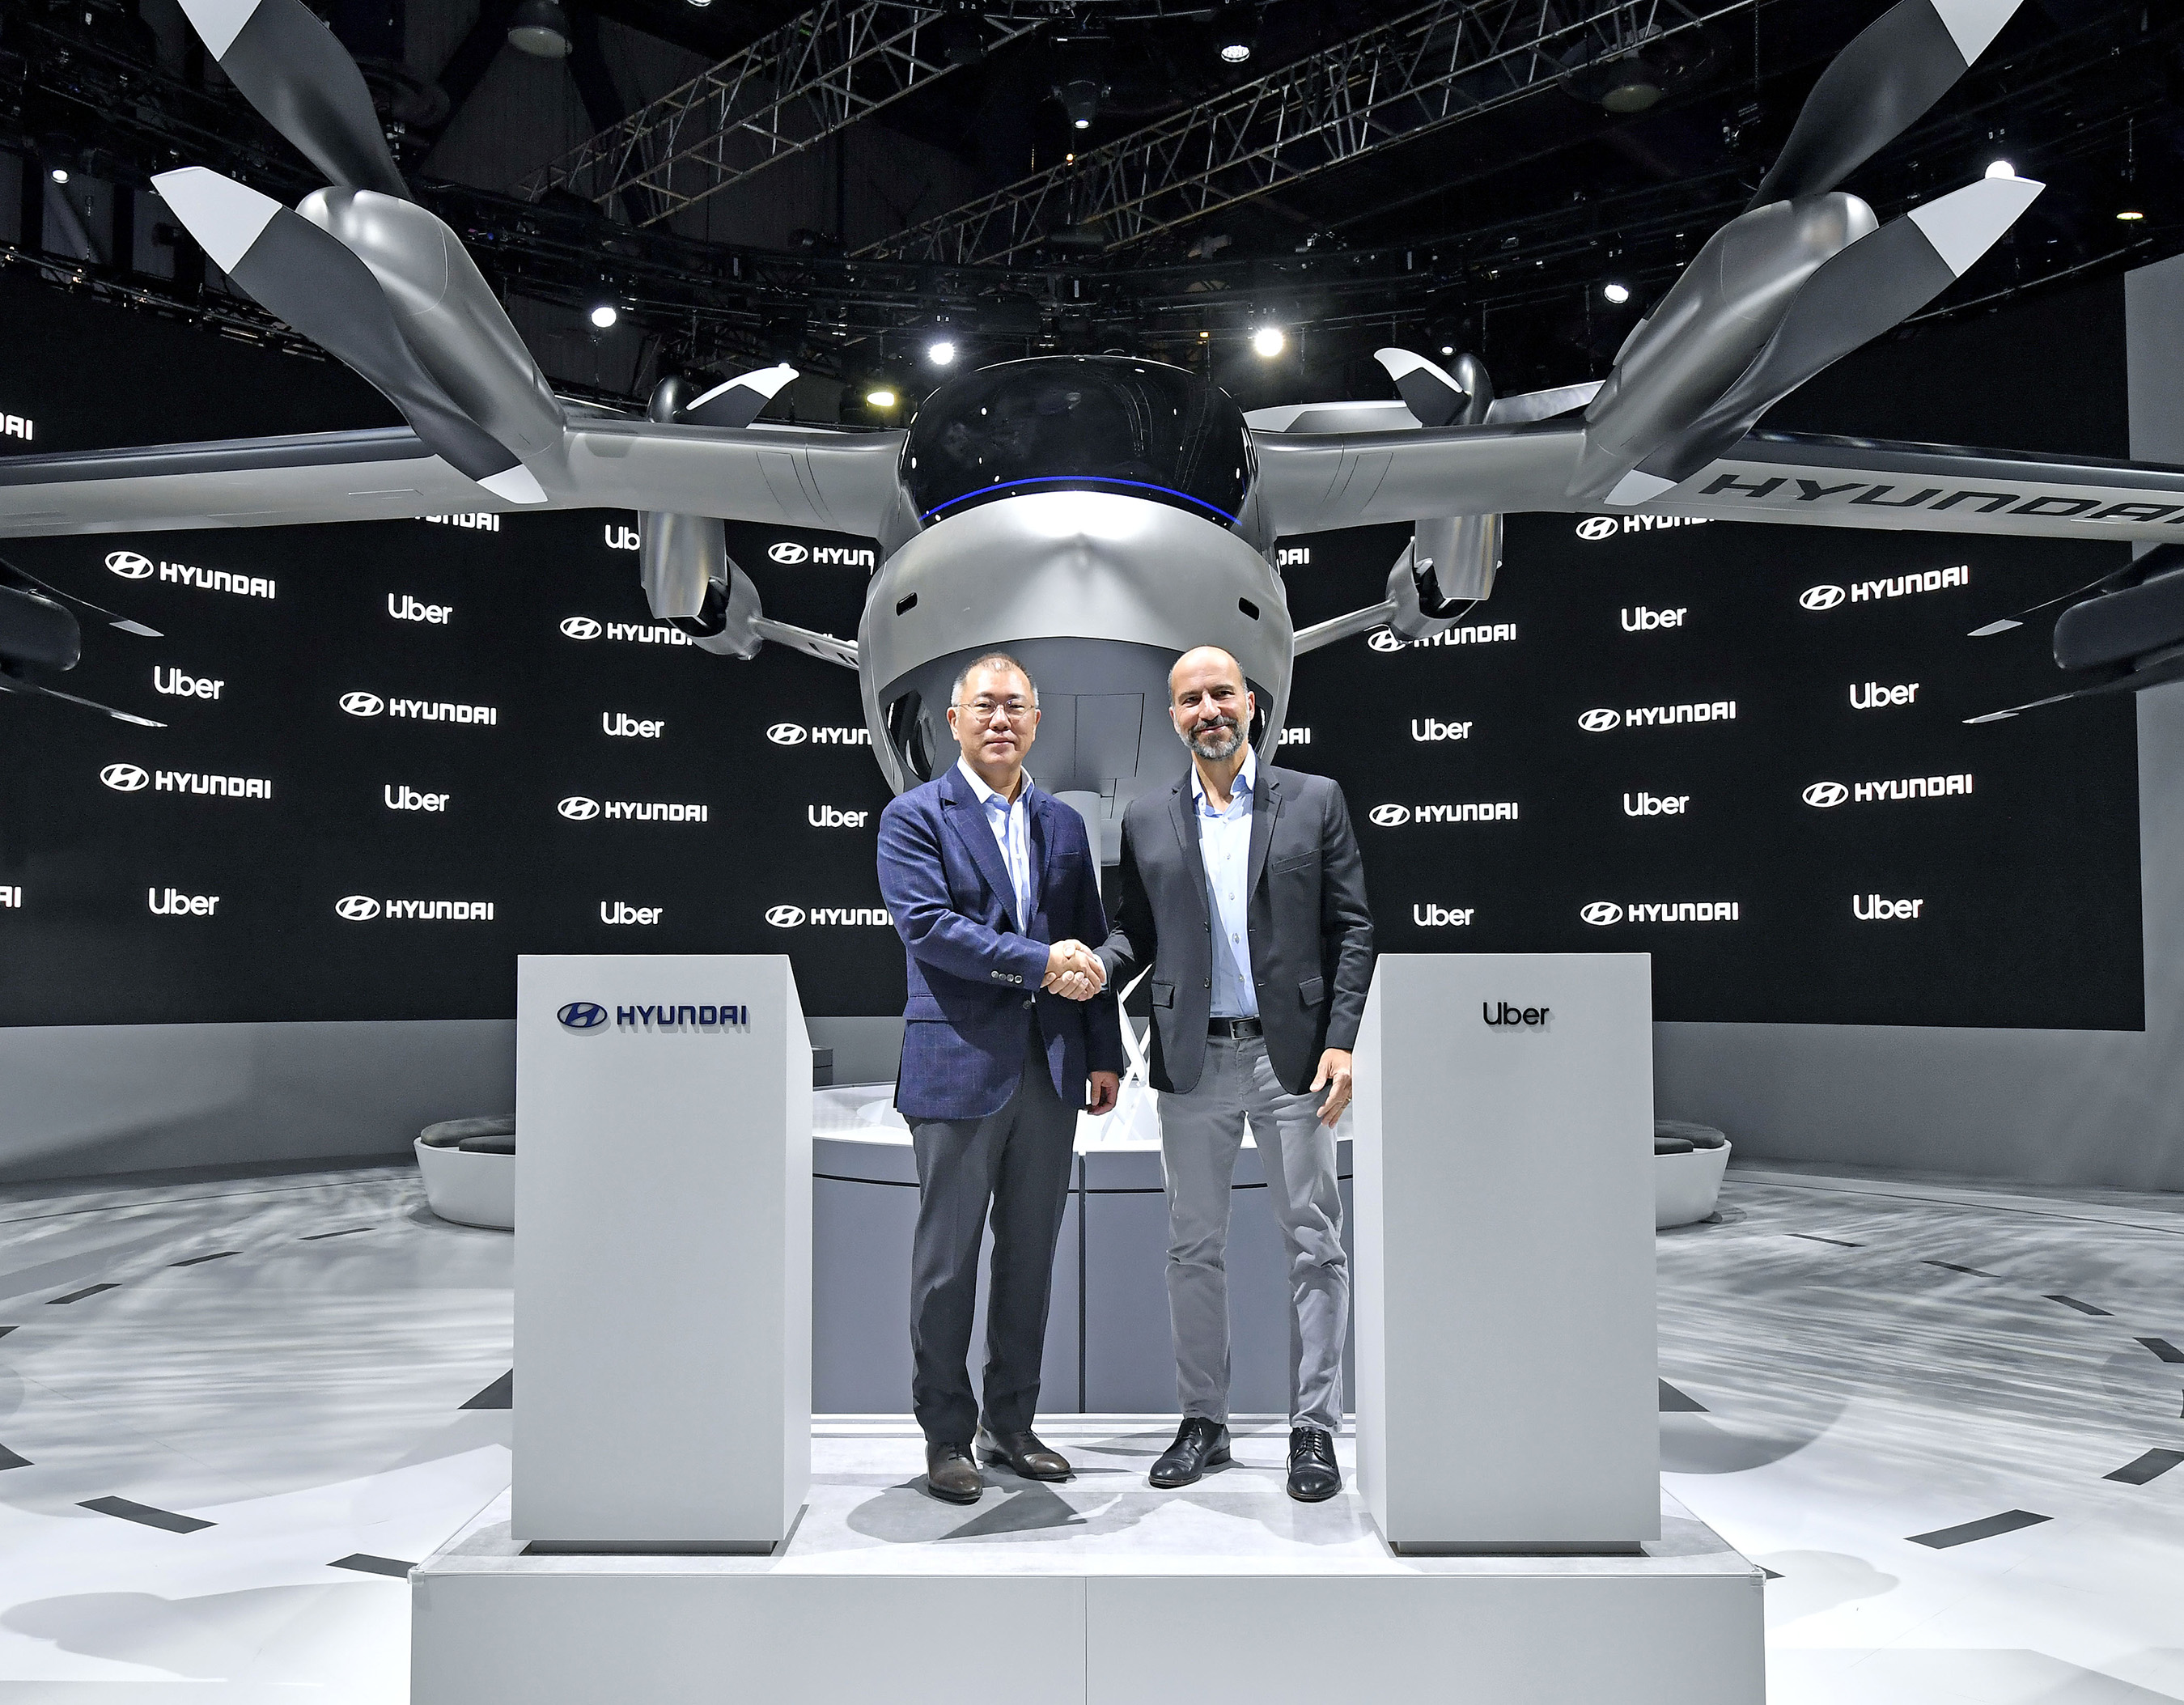 Hyundai Motor Company and Uber have announced a new partnership to develop Uber Air Taxis for a future aerial ride share network and unveiled a new full-scale aircraft concept at CES 2020. From left to right: Euisun Chung, Executive Vice Chairman of Hyundai Motor Group / Dara Khosrowshahi, CEO of Uber